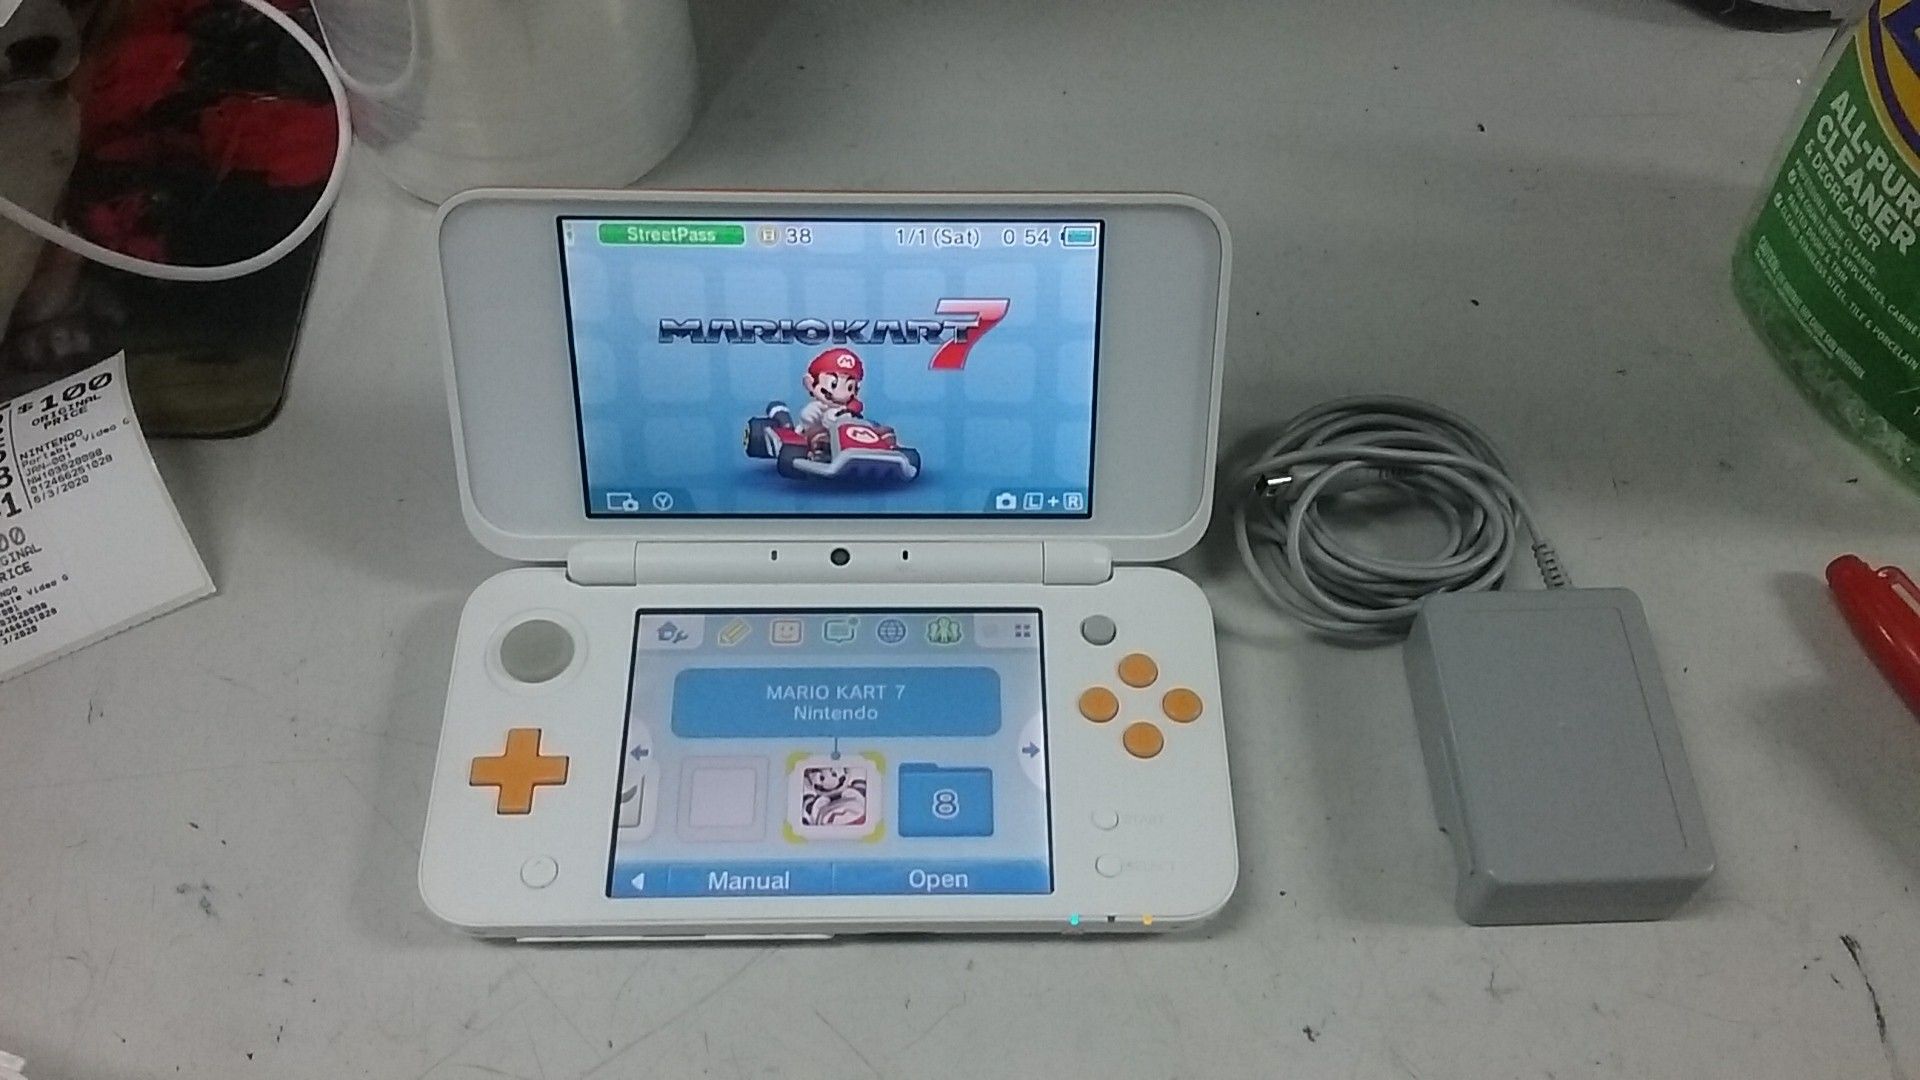 Nintendo 2DS XL with built in Mario Kart 7 game